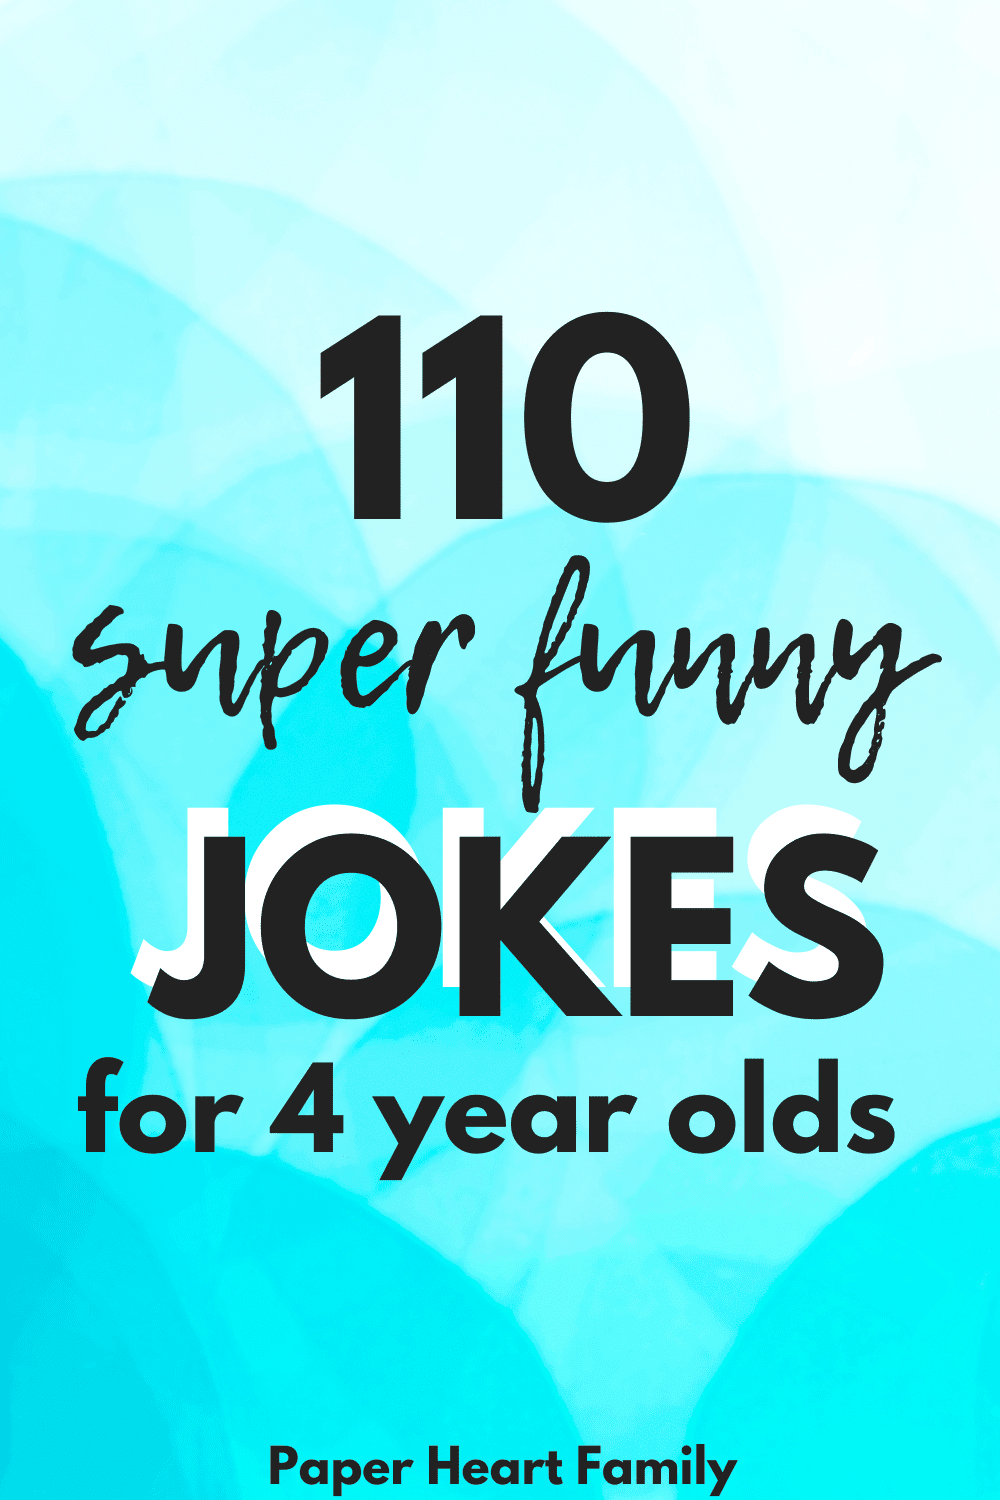 Jokes for 4 Year Olds